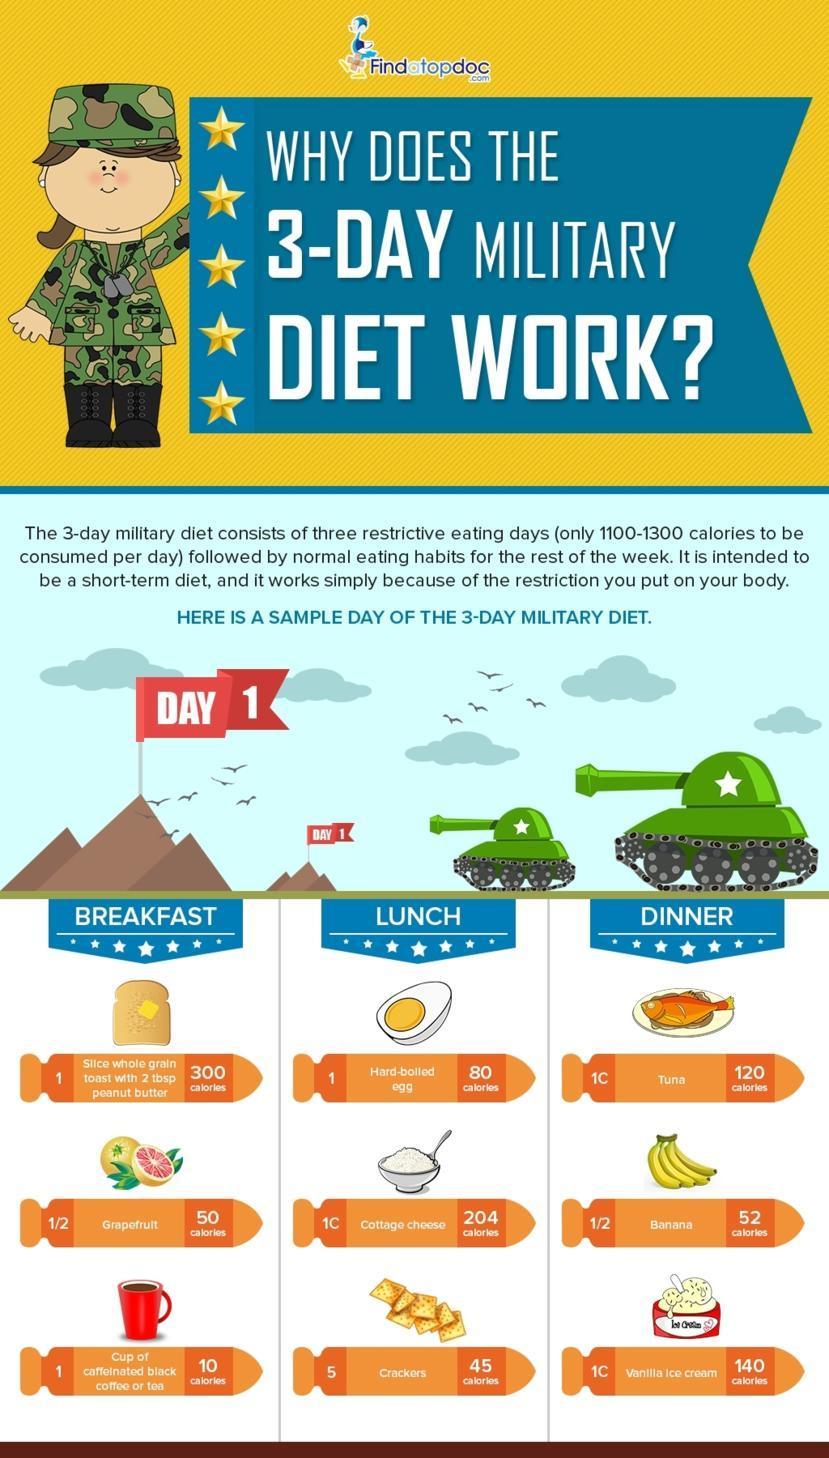 What is the Military Diet Substitutions?